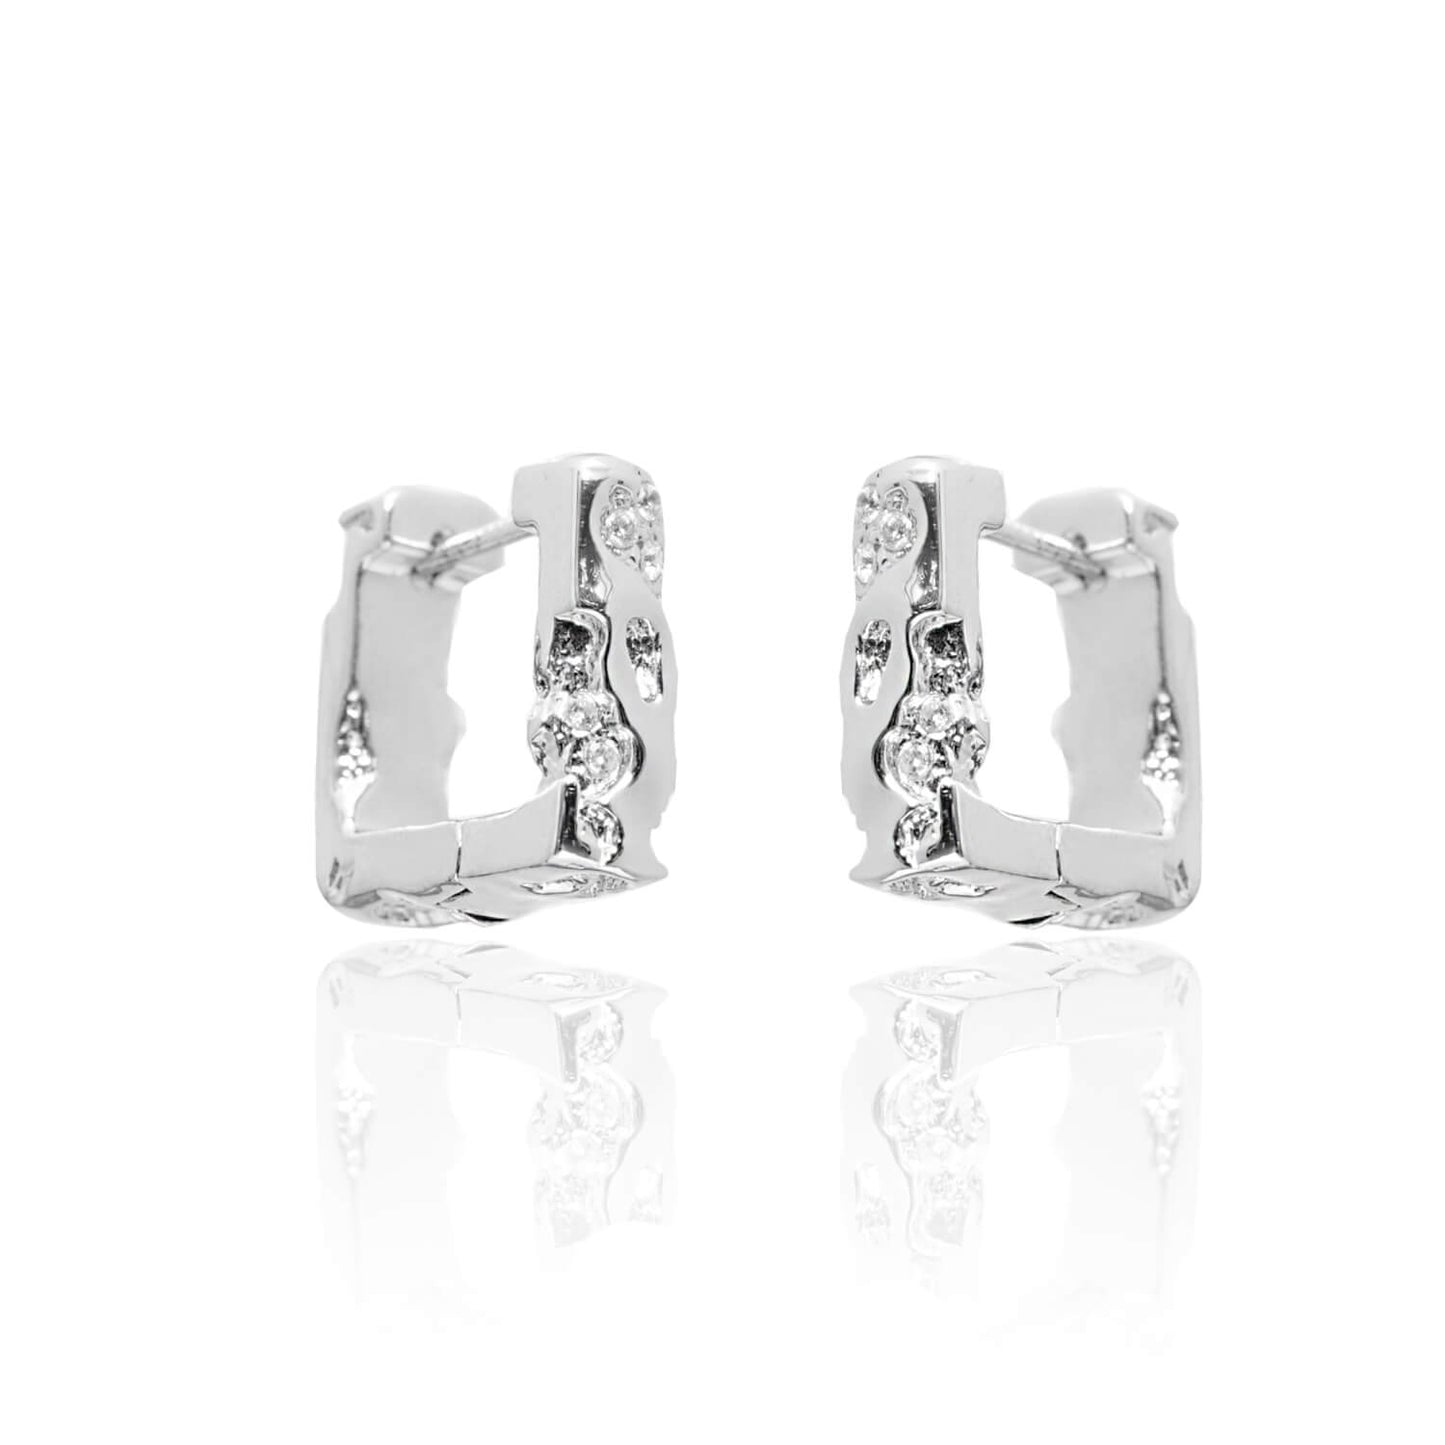 Modern Silver Square Studs  Buy at Khanie